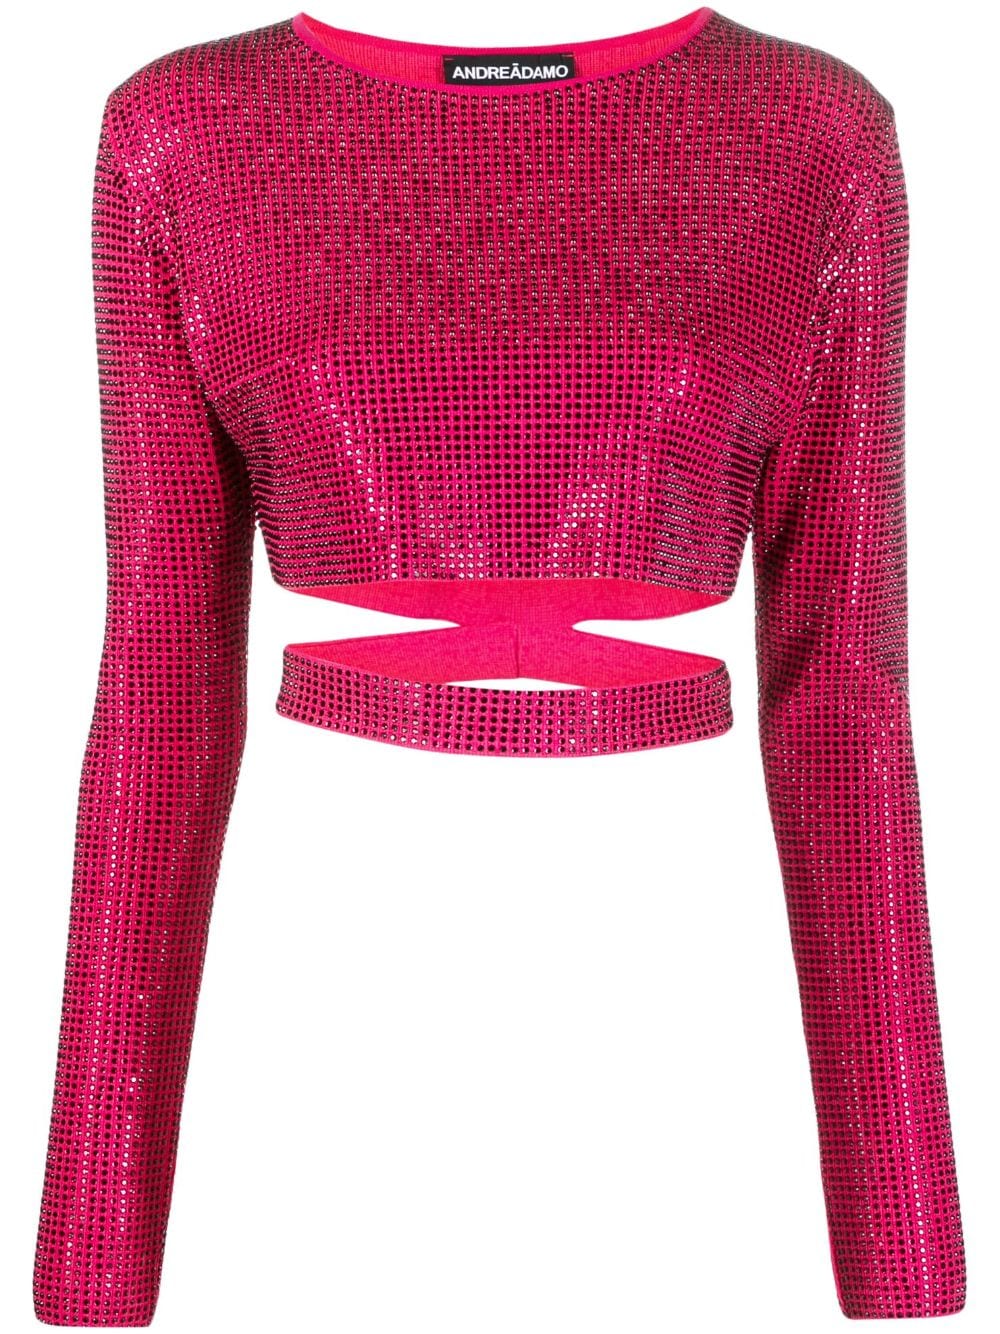 Andreädamo Full Strass Stretch Knit Crop T In Pink